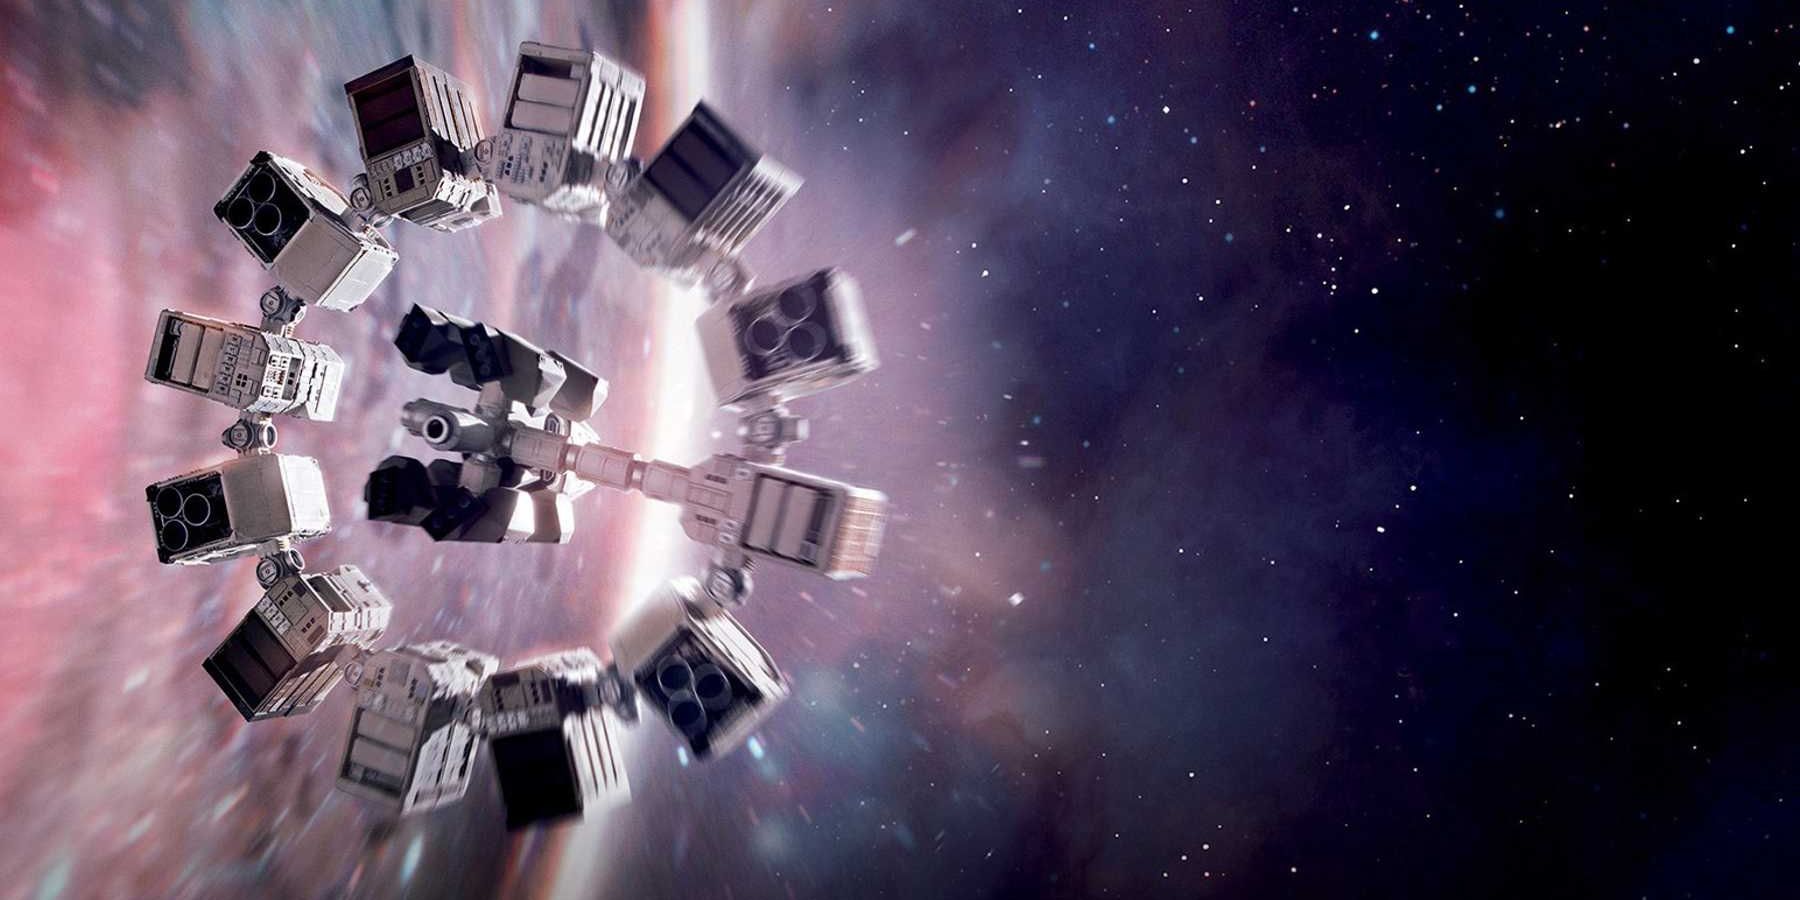 Christopher Nolan 5 Ways Interstellar Is Better Than Inception (& 5 Why Inception Is Better)